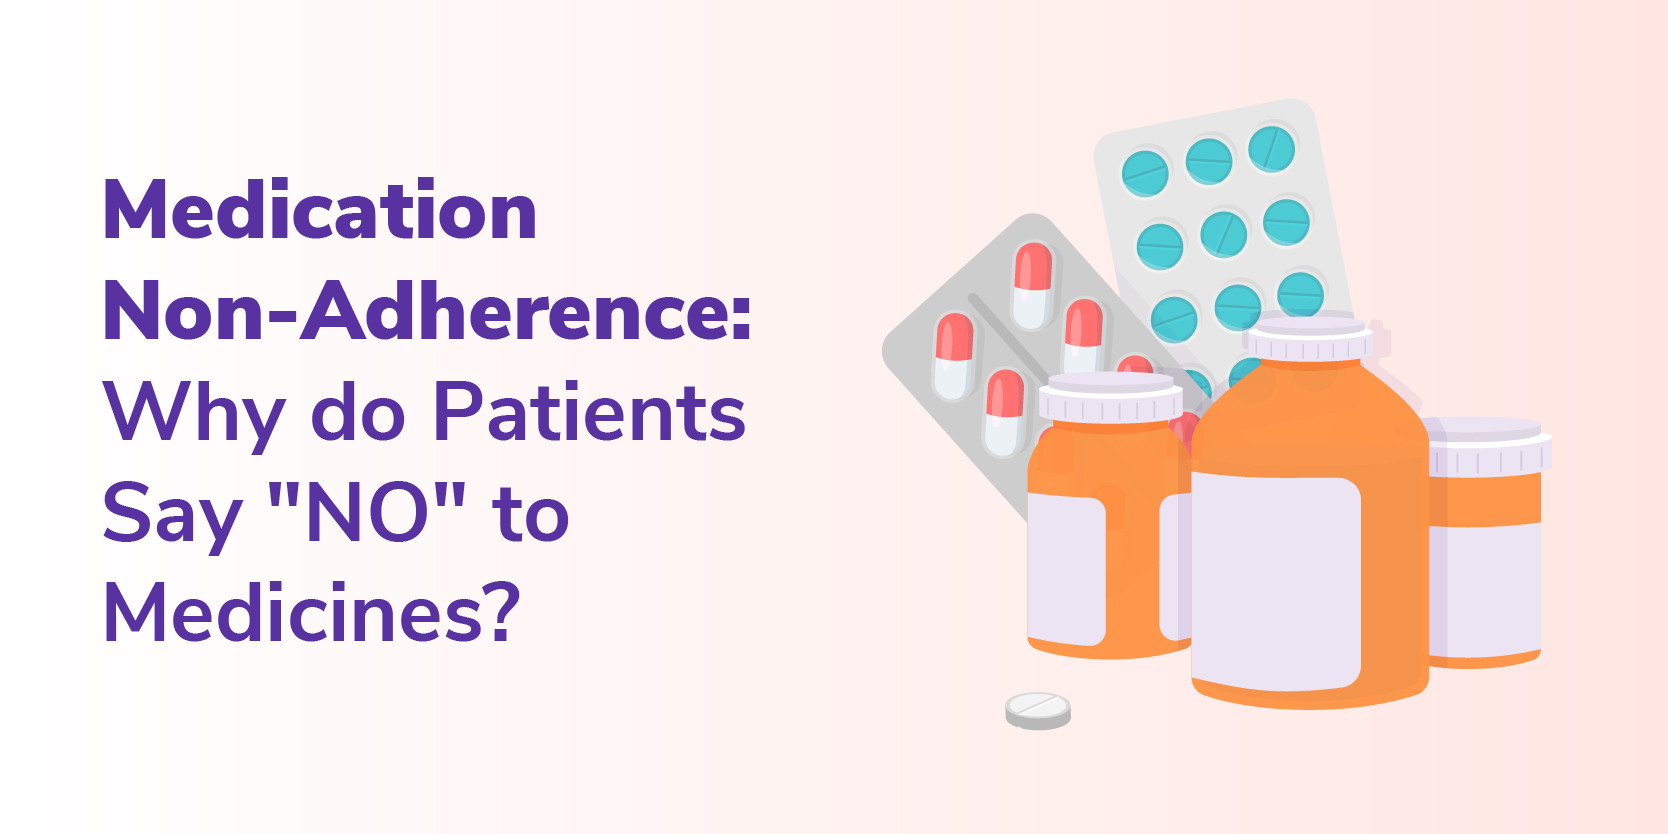 Medication Non-Adherence: Why do Patients Say "NO" to Medicines?